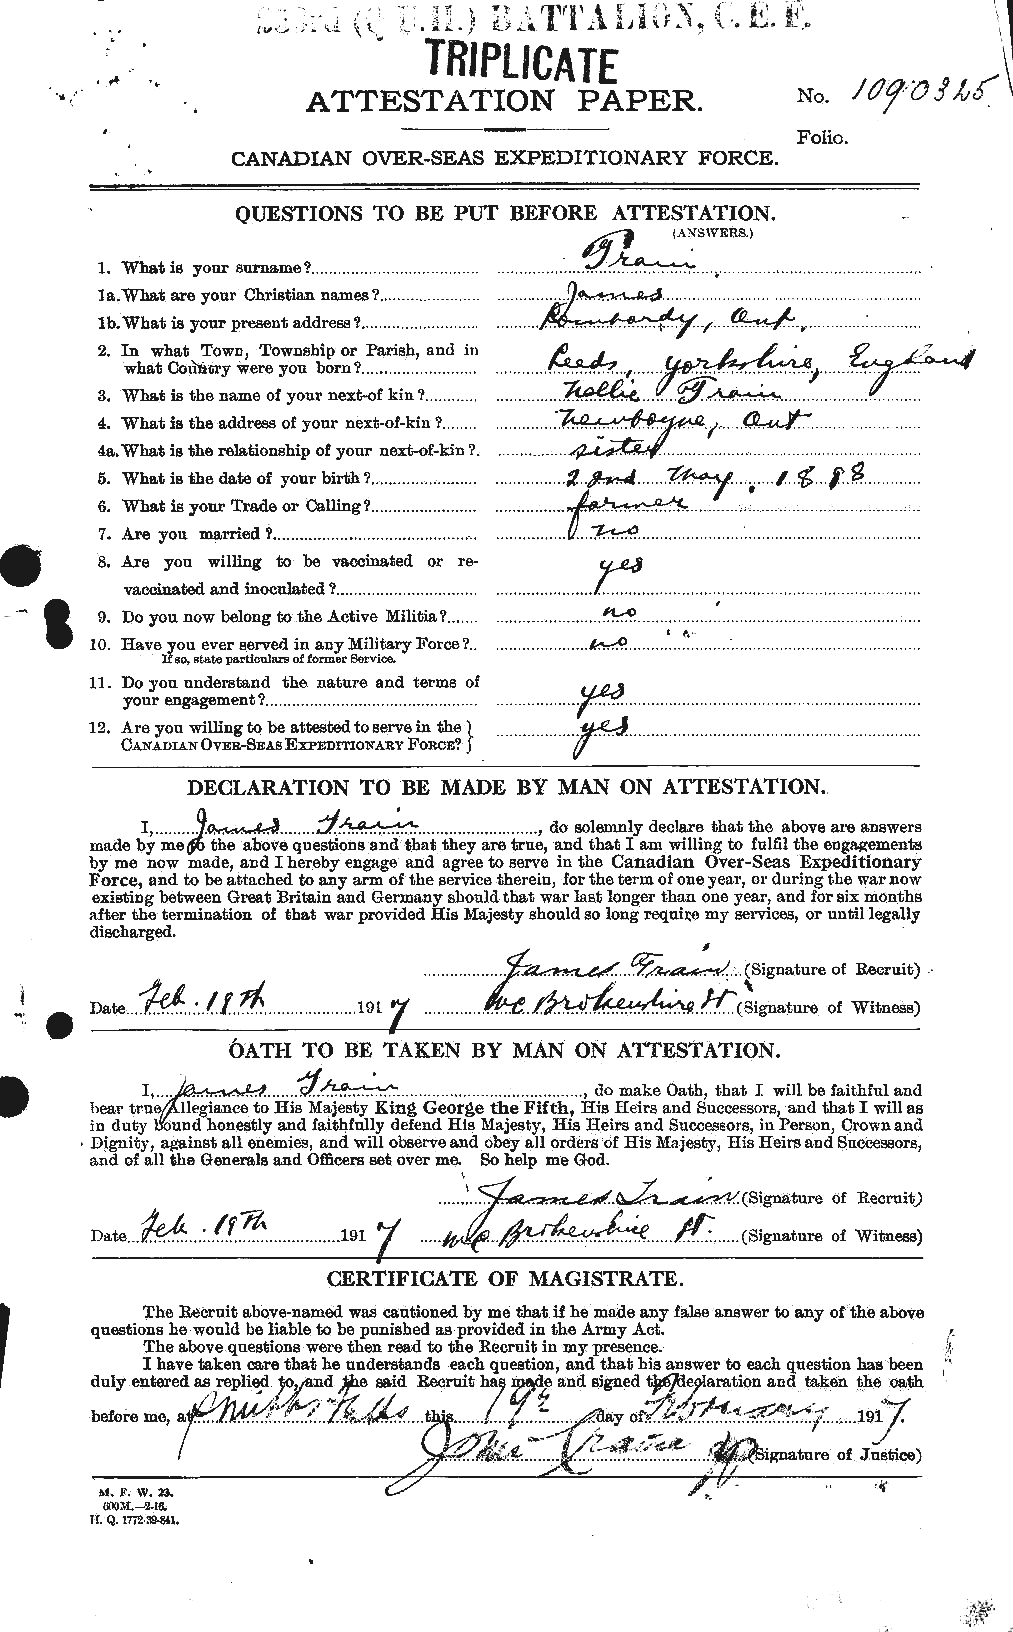 Personnel Records of the First World War - CEF 637697a